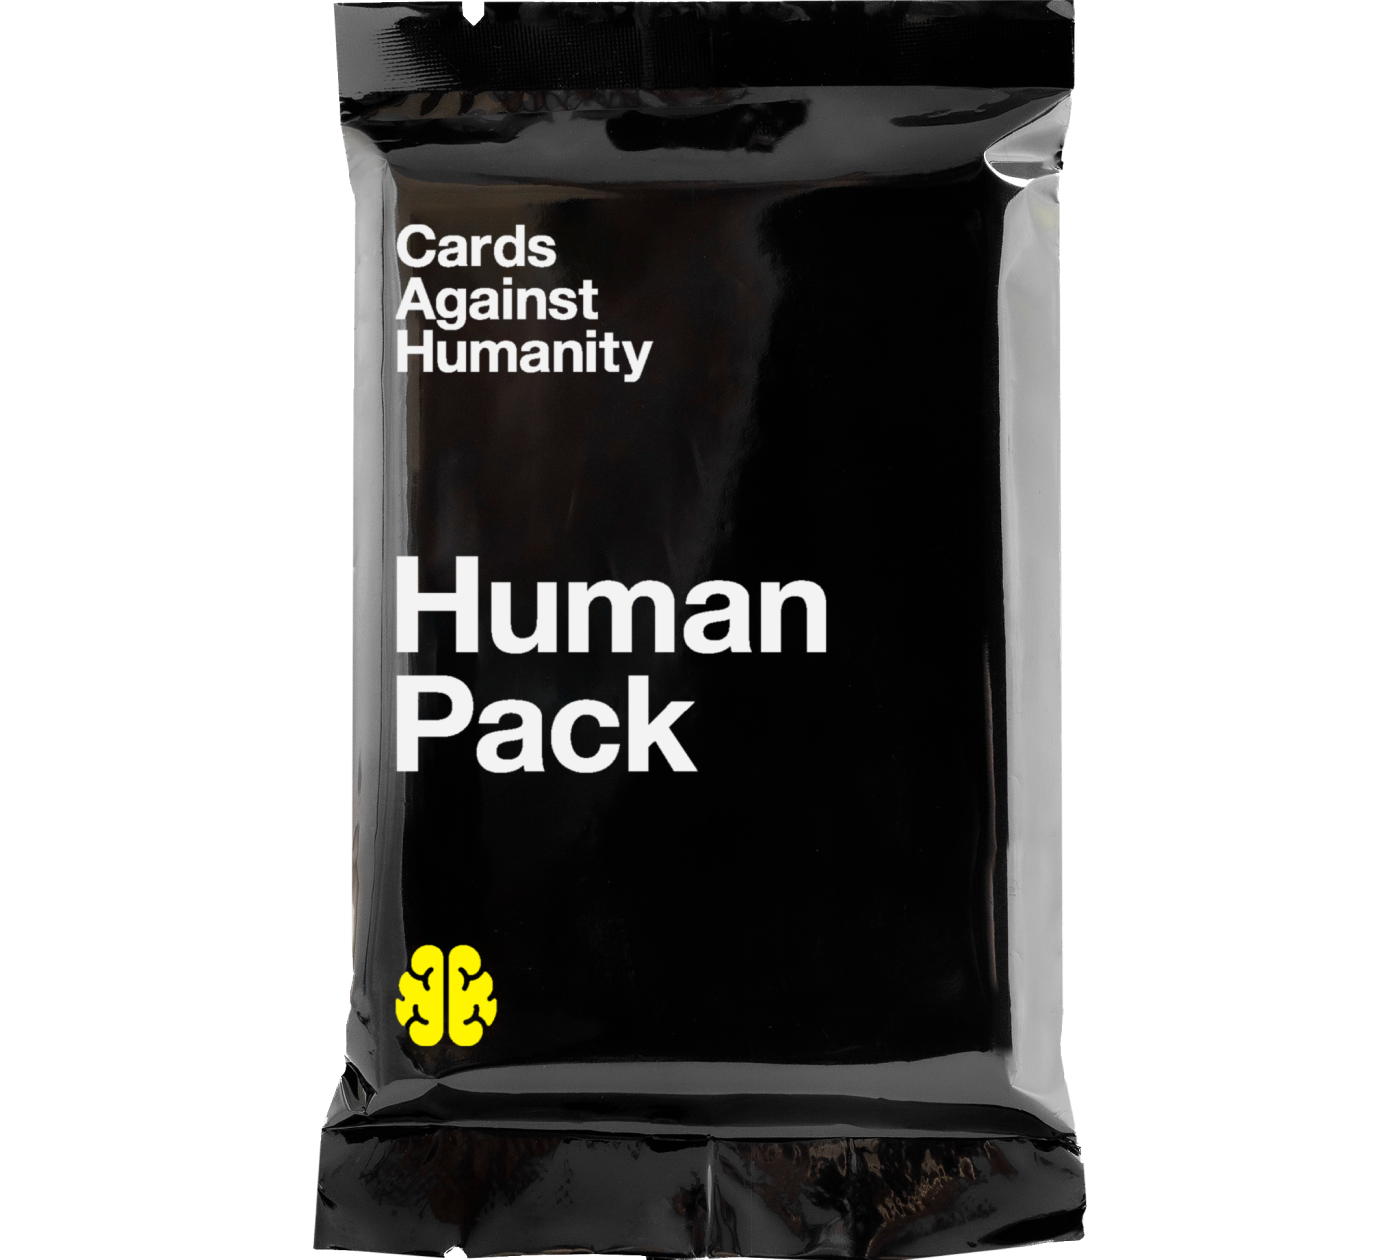 Free UK P&P Cards Against Humanity NEW GENUINE UK "Cards Against Humanity" Period Pack Expansion CAH 